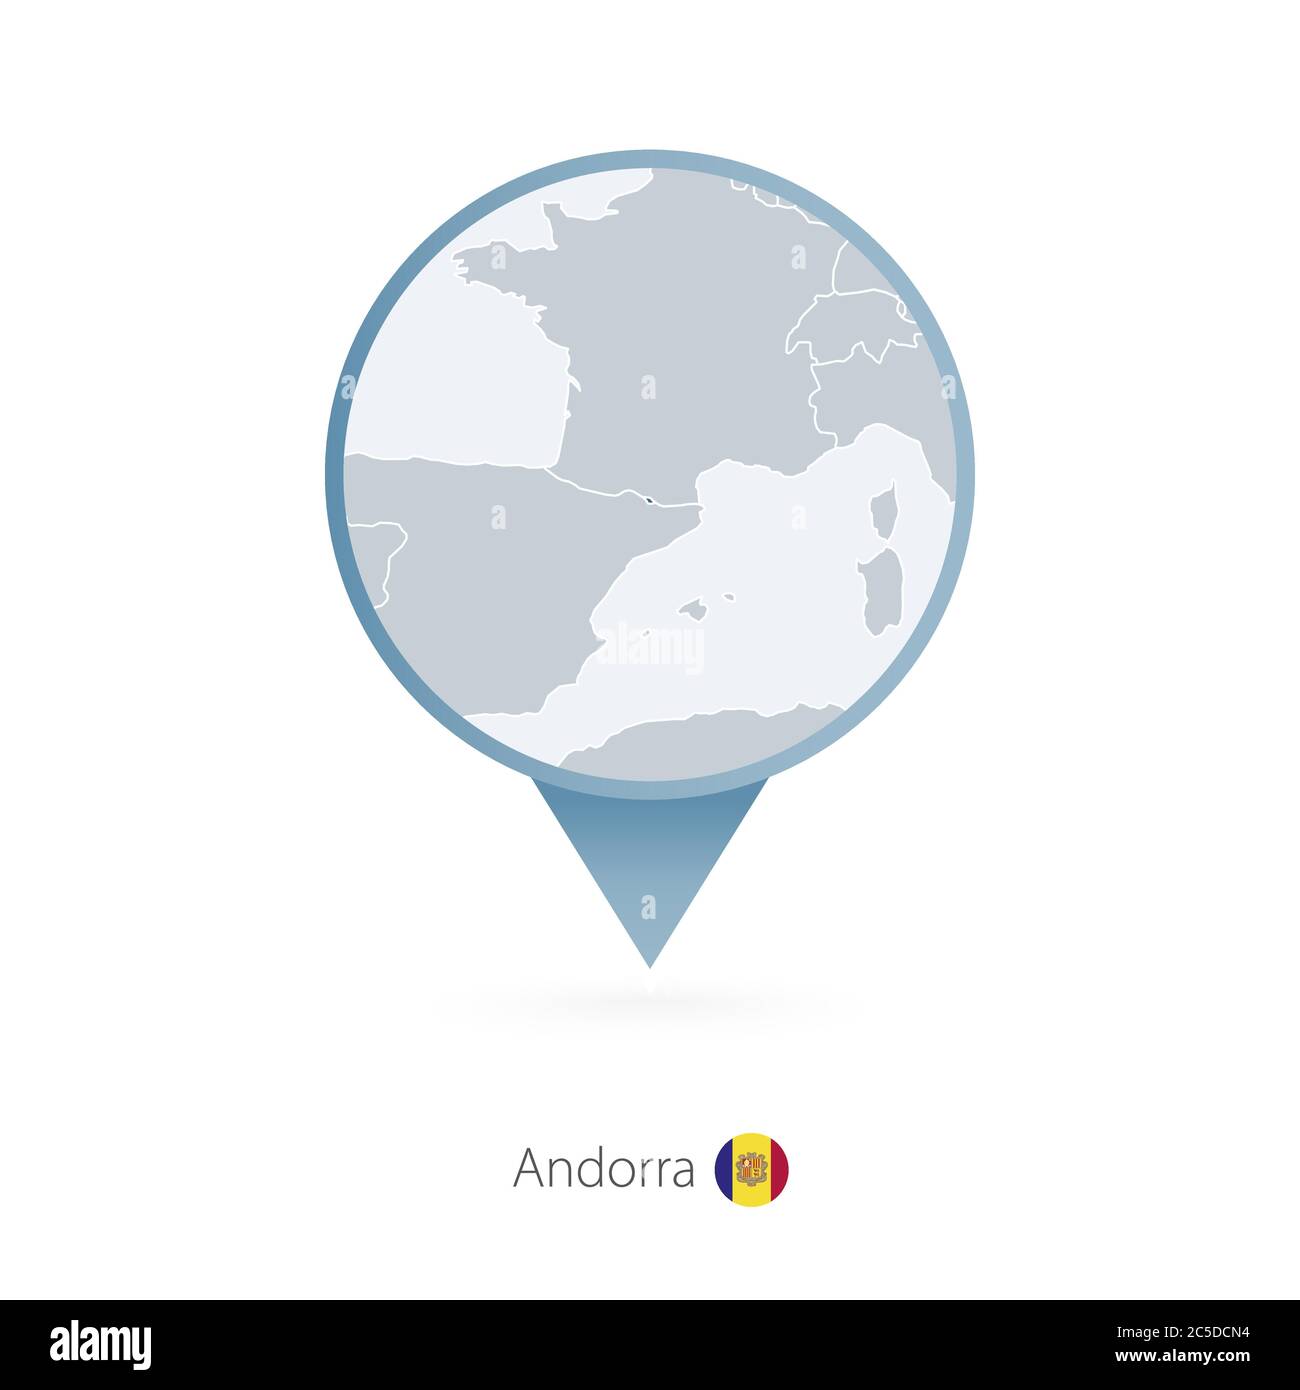 Map pin with detailed map of Andorra and neighboring countries. Stock Vector